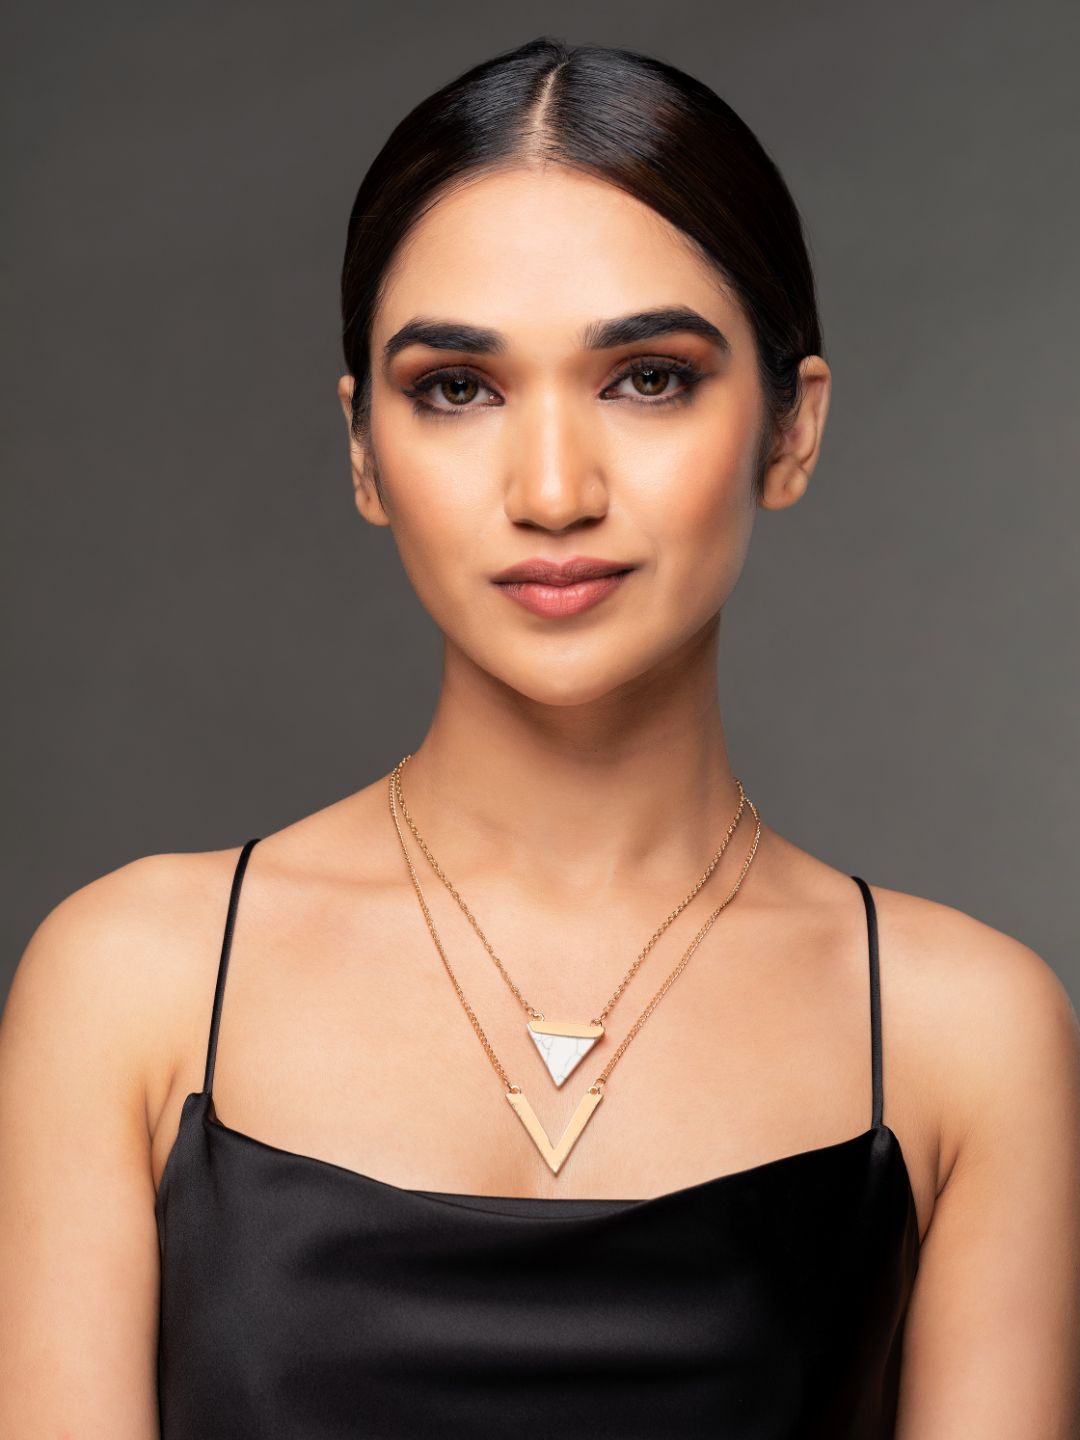 Women's  Gold Plated Triangle Pendant Layered Necklace - Priyaasi